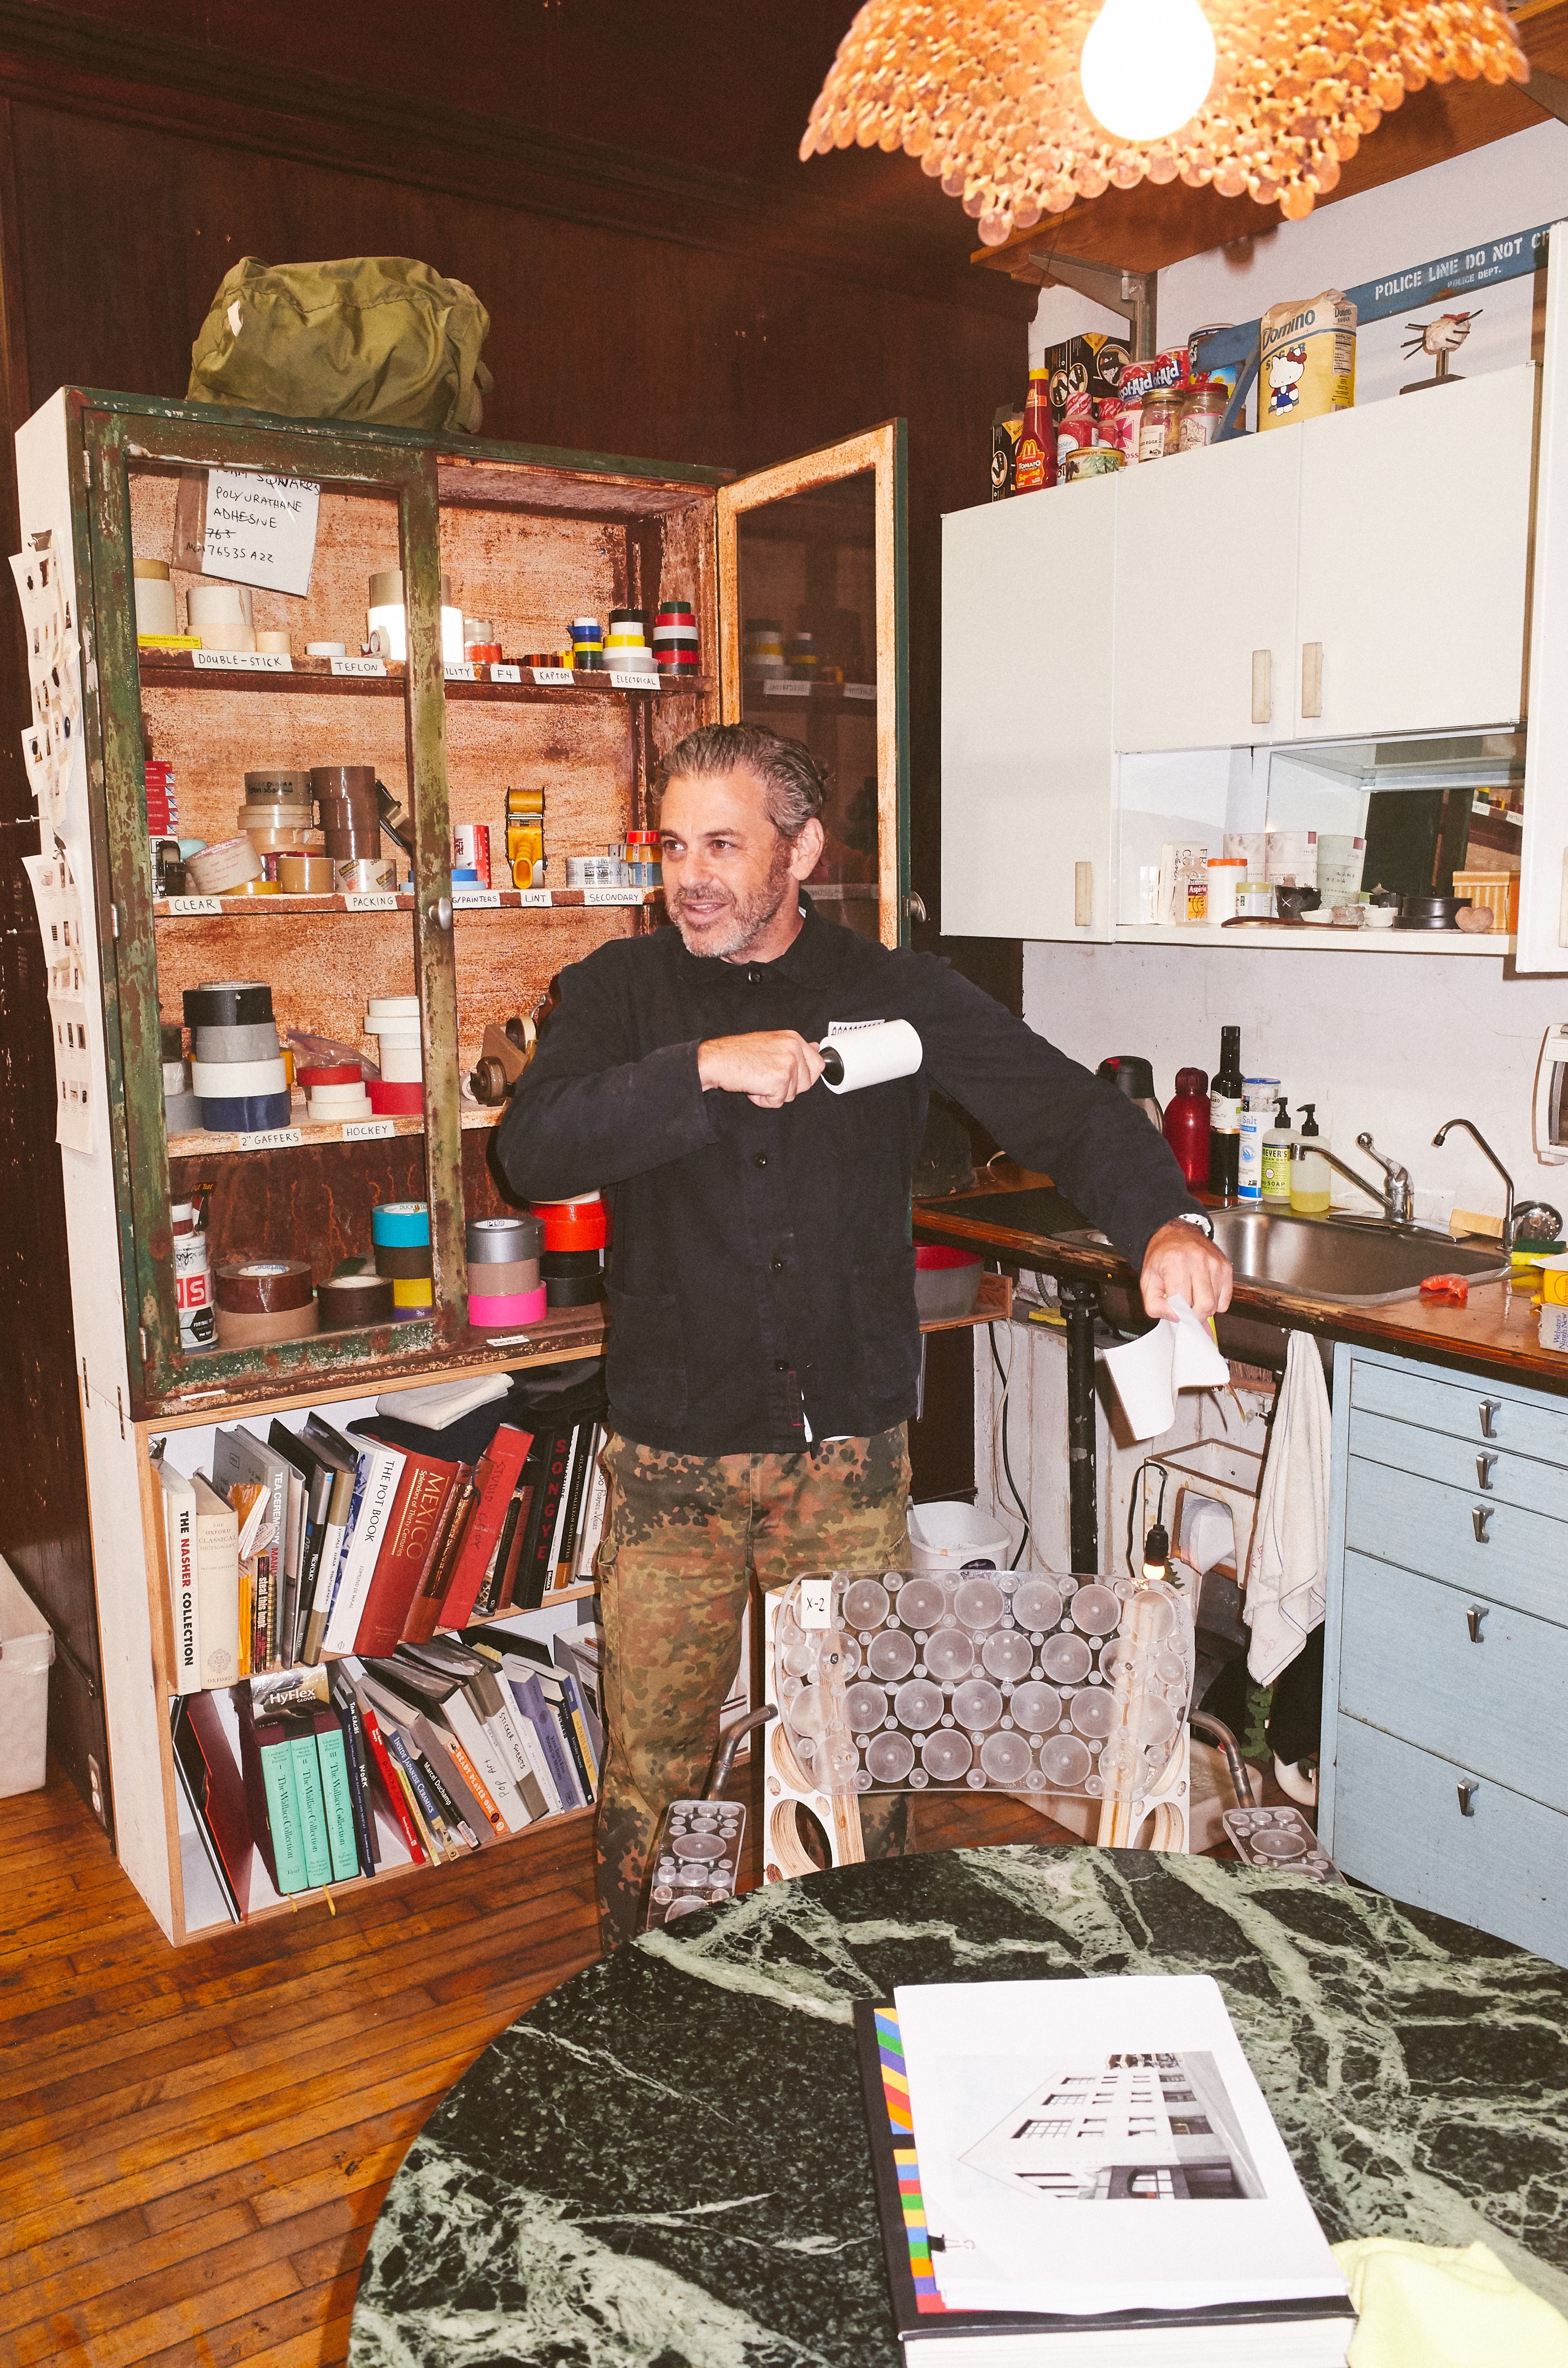 tom sachs on his obsession with making stuff - i-D